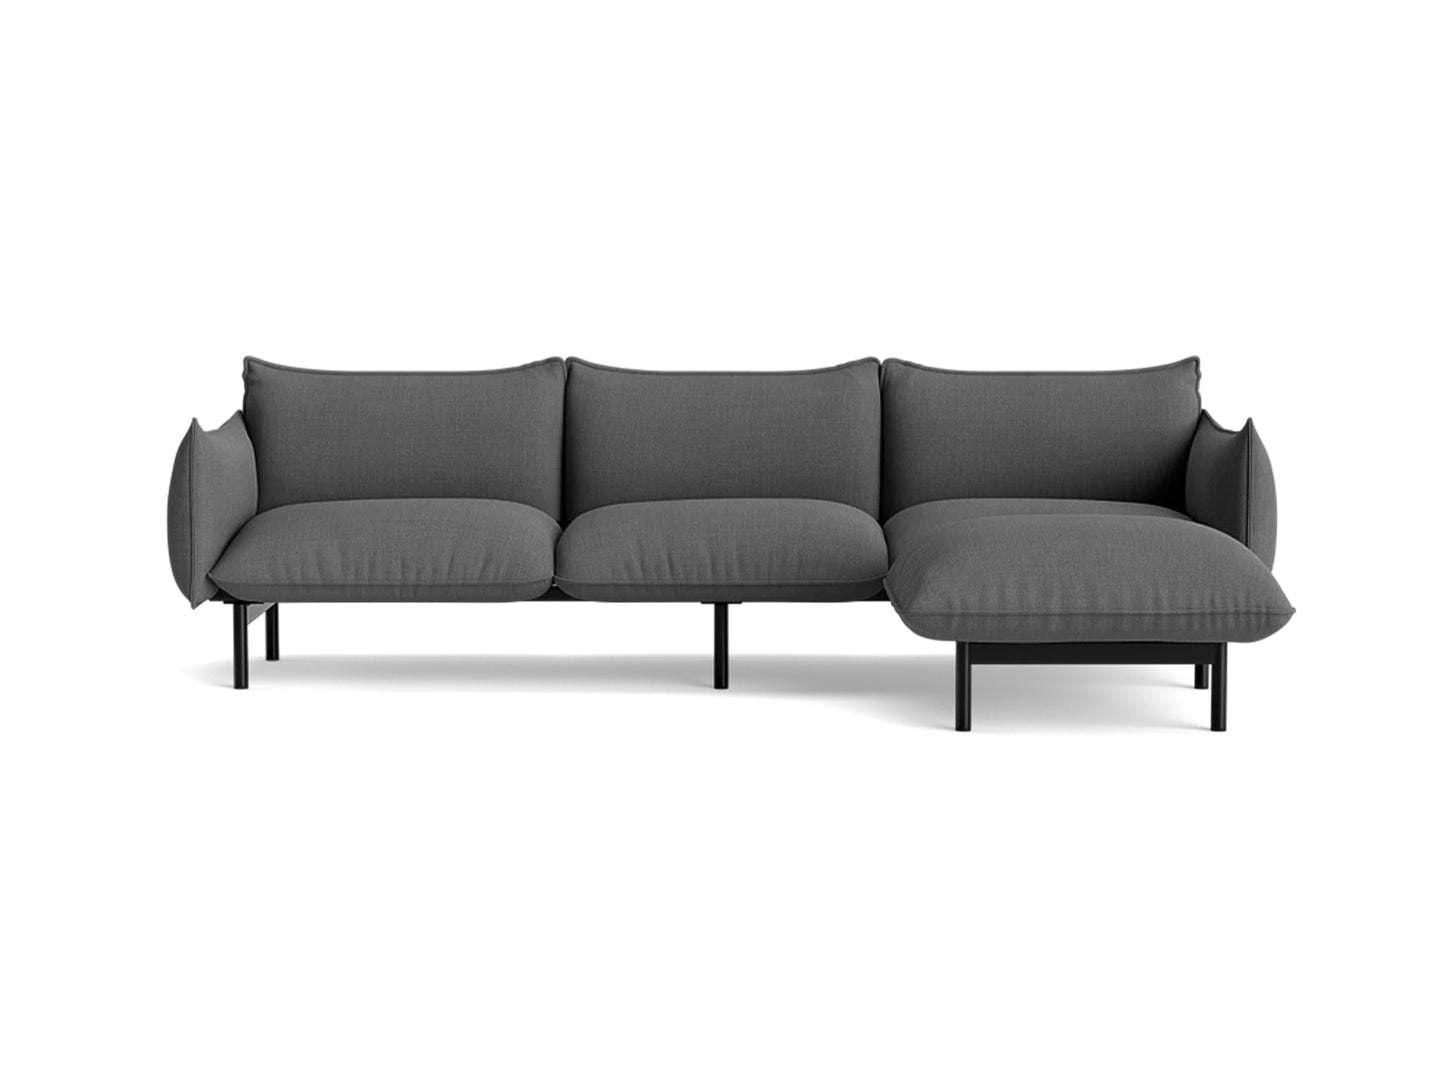 Ark Modular Sofa 3-Seater Sofa by Normann Copenhagen - with Right Chaise Longue (Sitting Left) - Remix 163